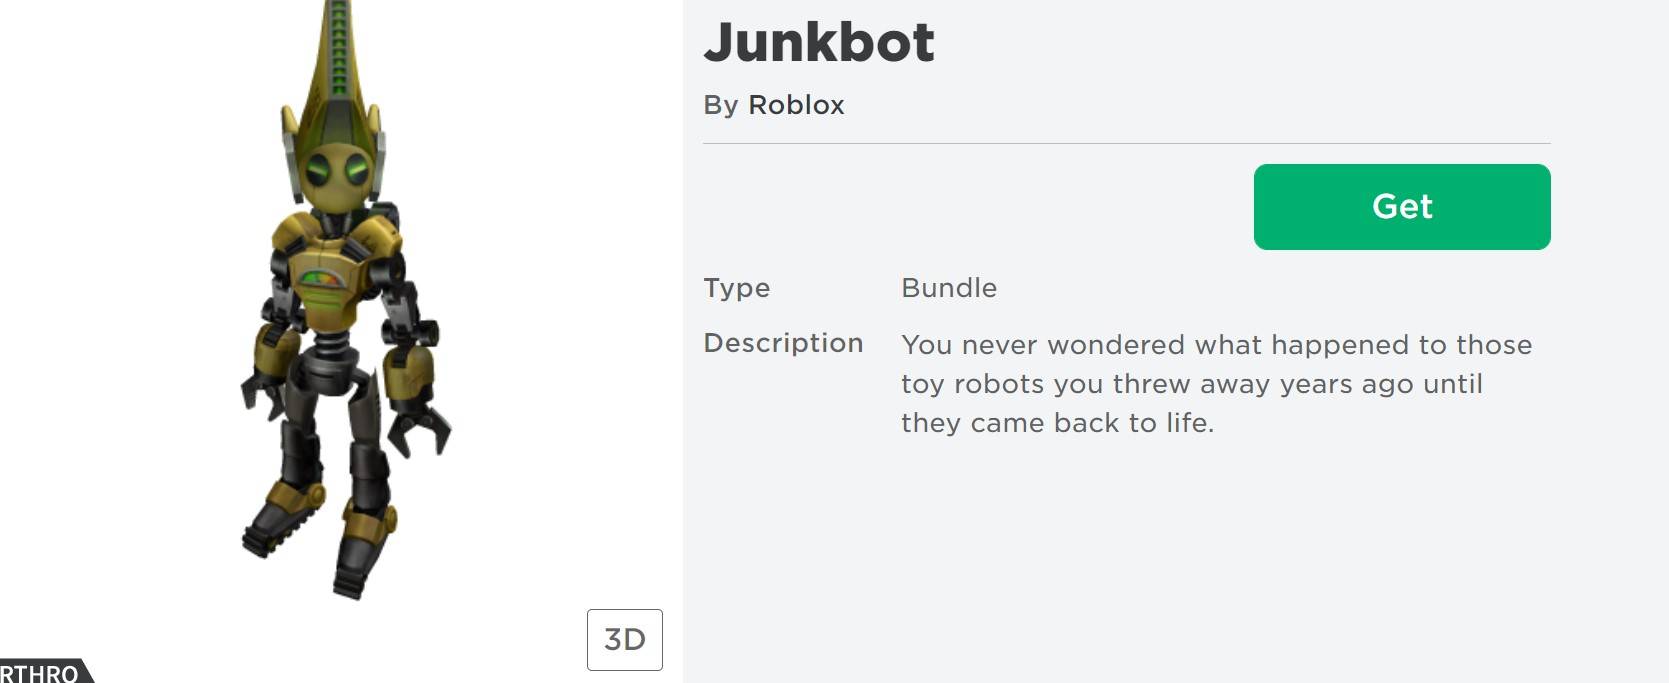 Roblox Promo Codes For Free Items In June 2021 - how to get free items in roblox